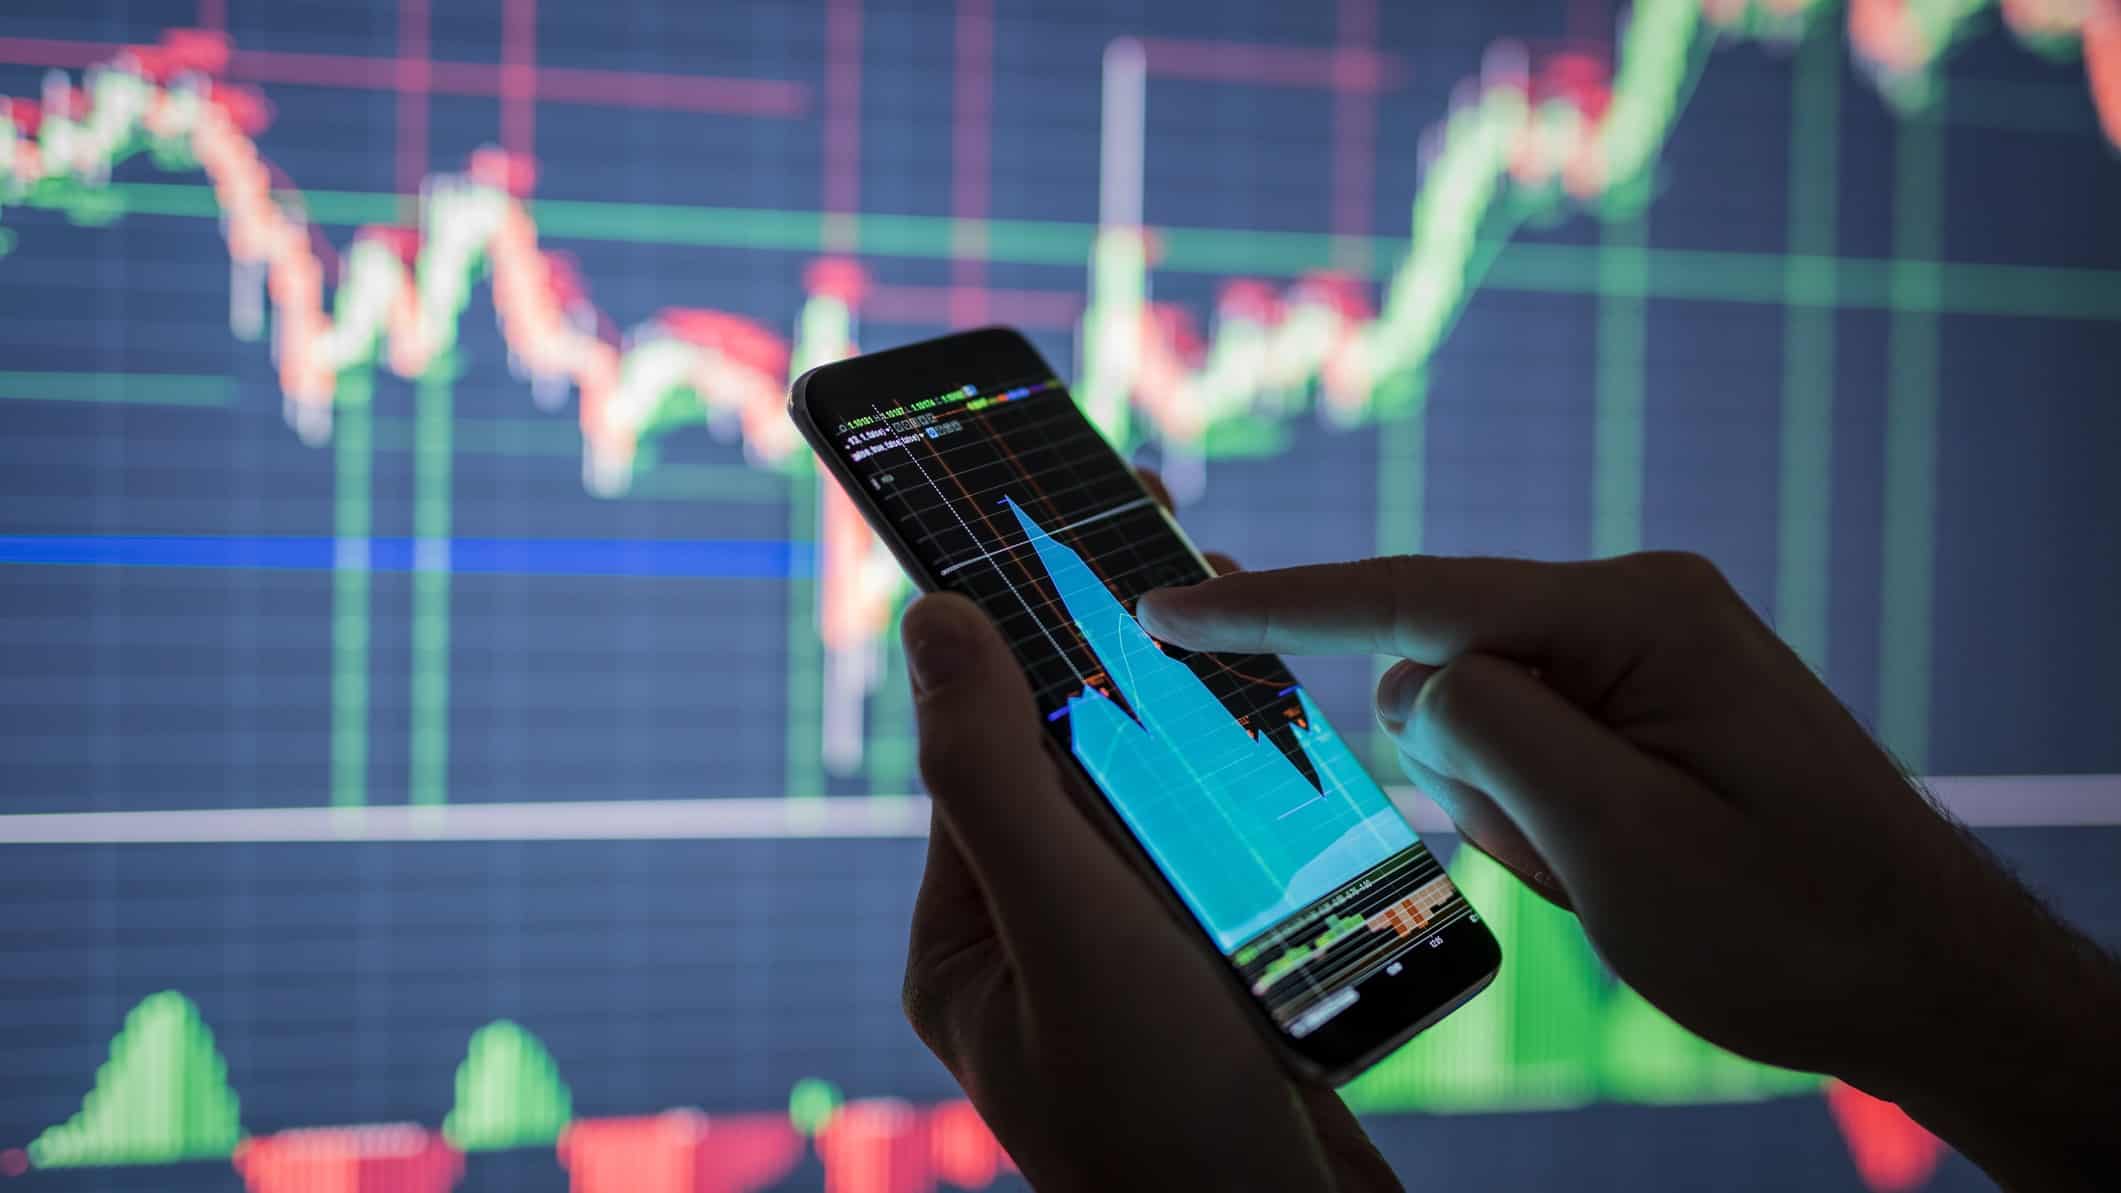 stockmarket graphic in background with man looking at stockmarket on phone